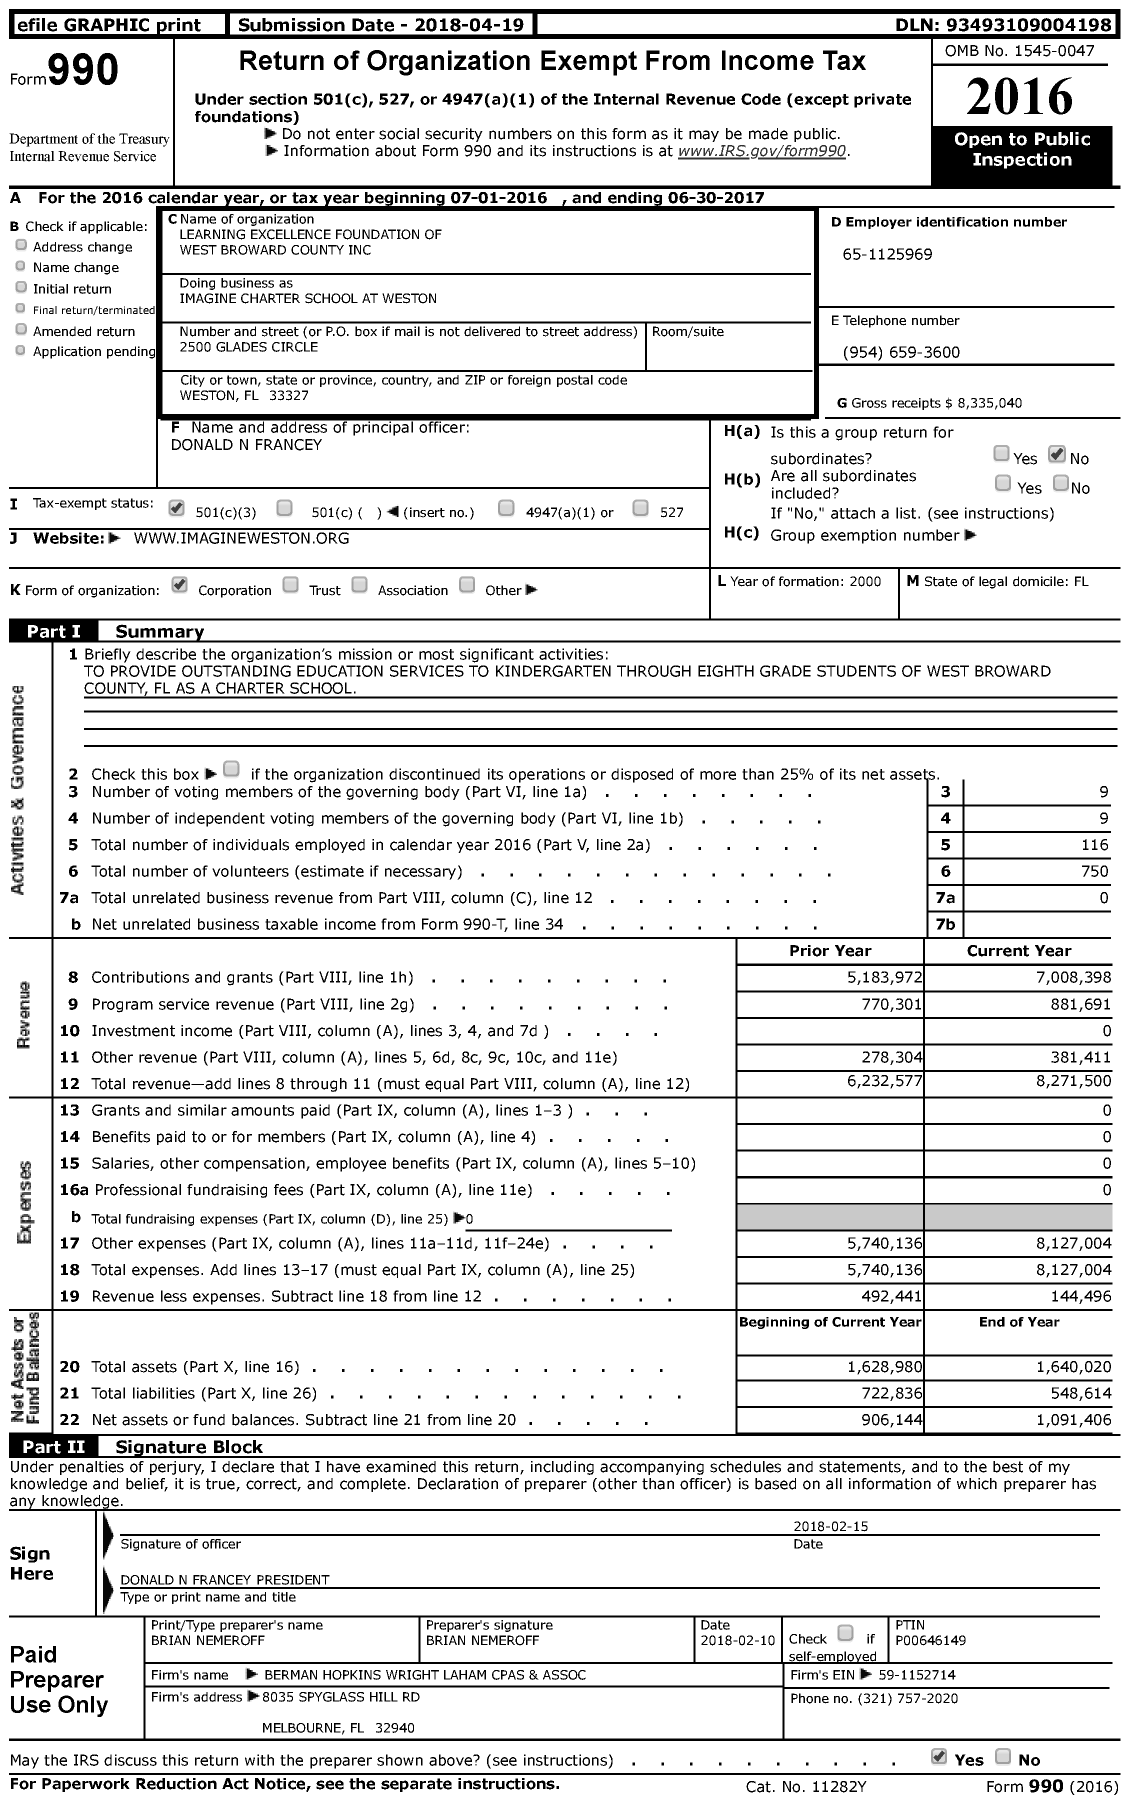 Image of first page of 2016 Form 990 for Imagine Charter School at Weston